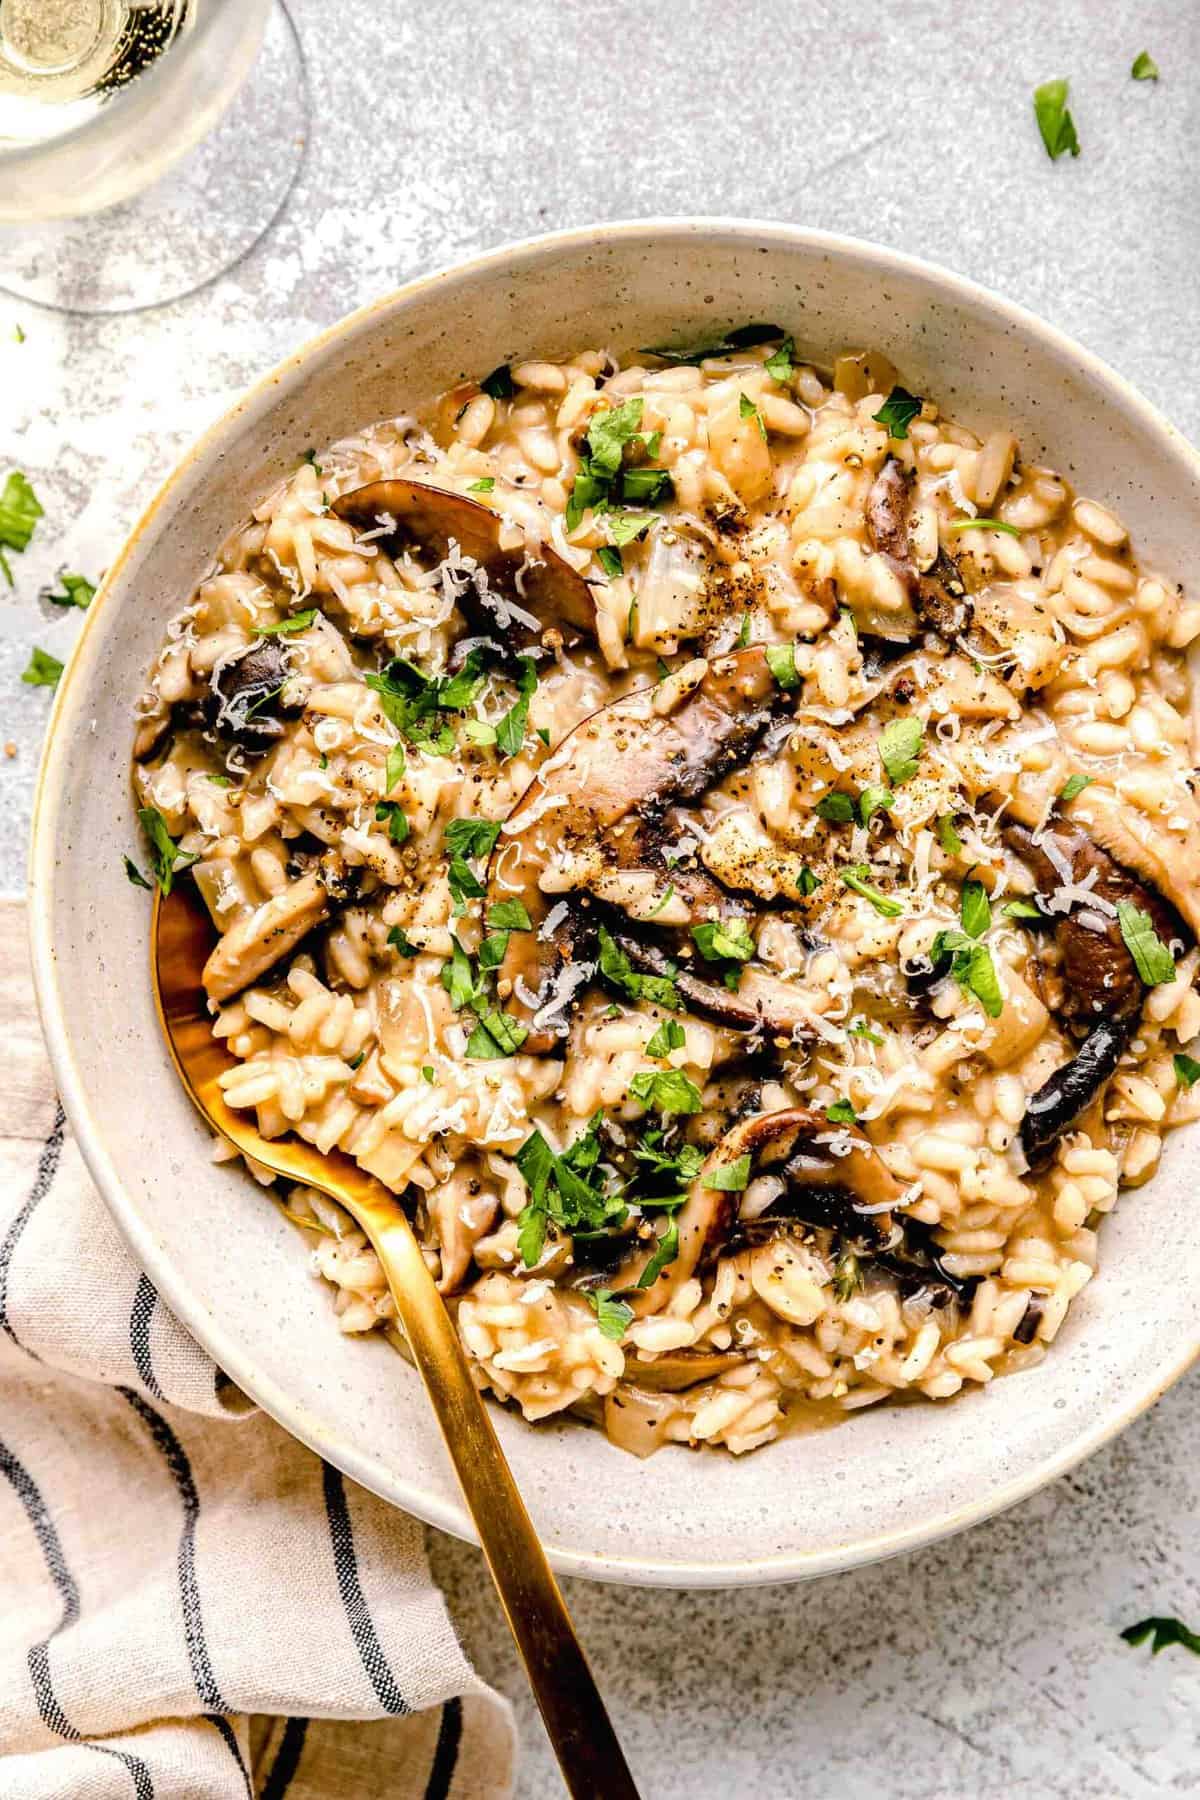 Mushroom risotto in a dinner bowl with a spoon next to a glass of white wine and garnished with fresh parsley.